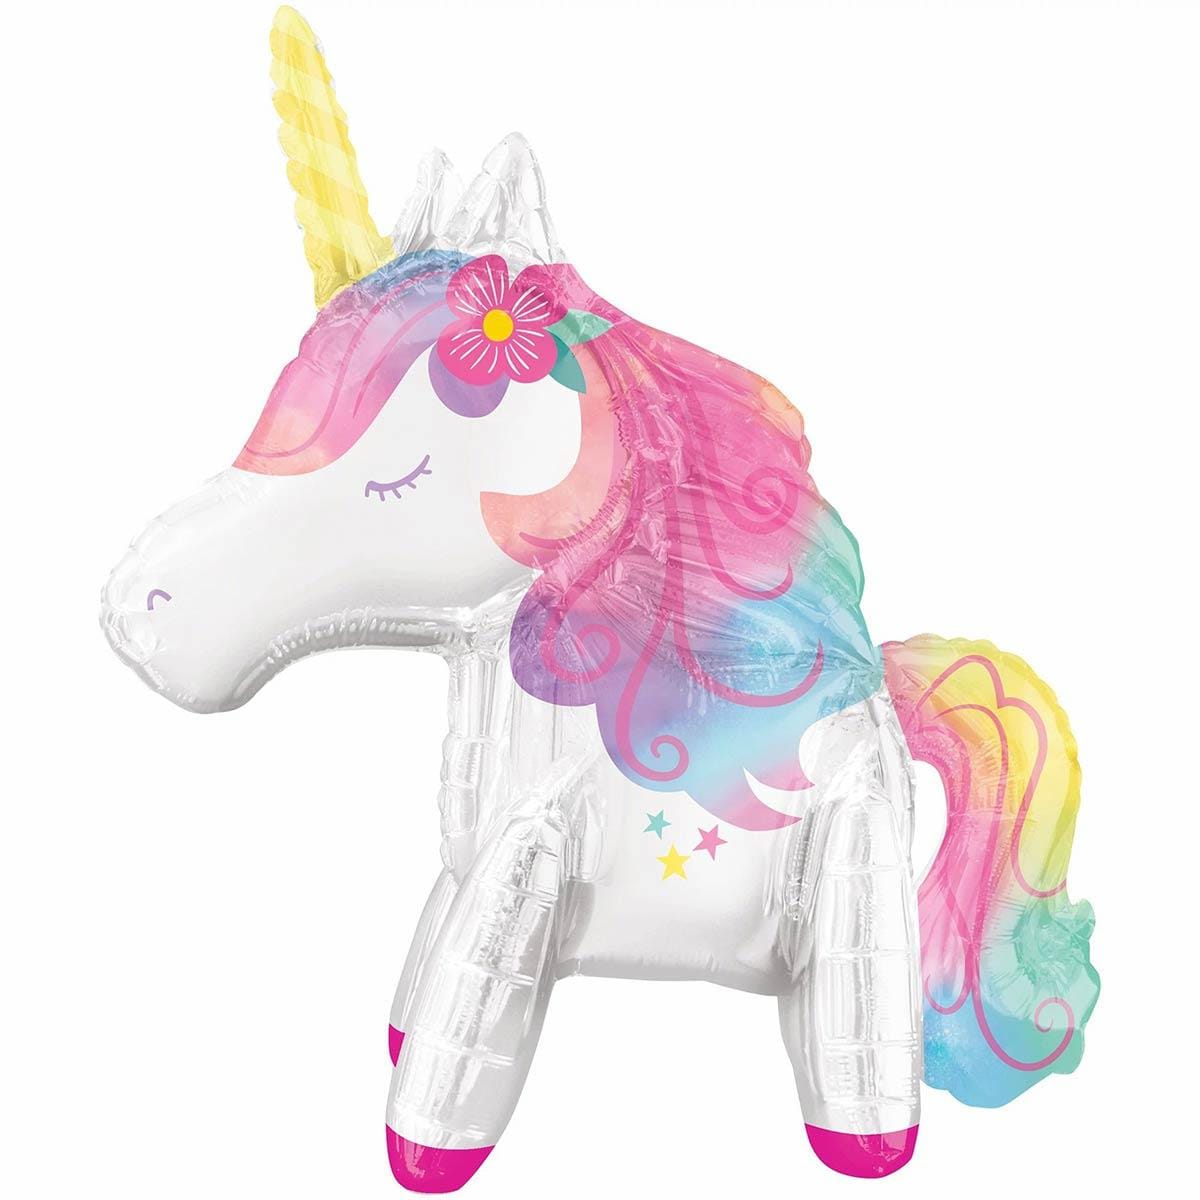 Buy Balloons Enchanted Unicorn Air Filled Centerpiece sold at Party Expert